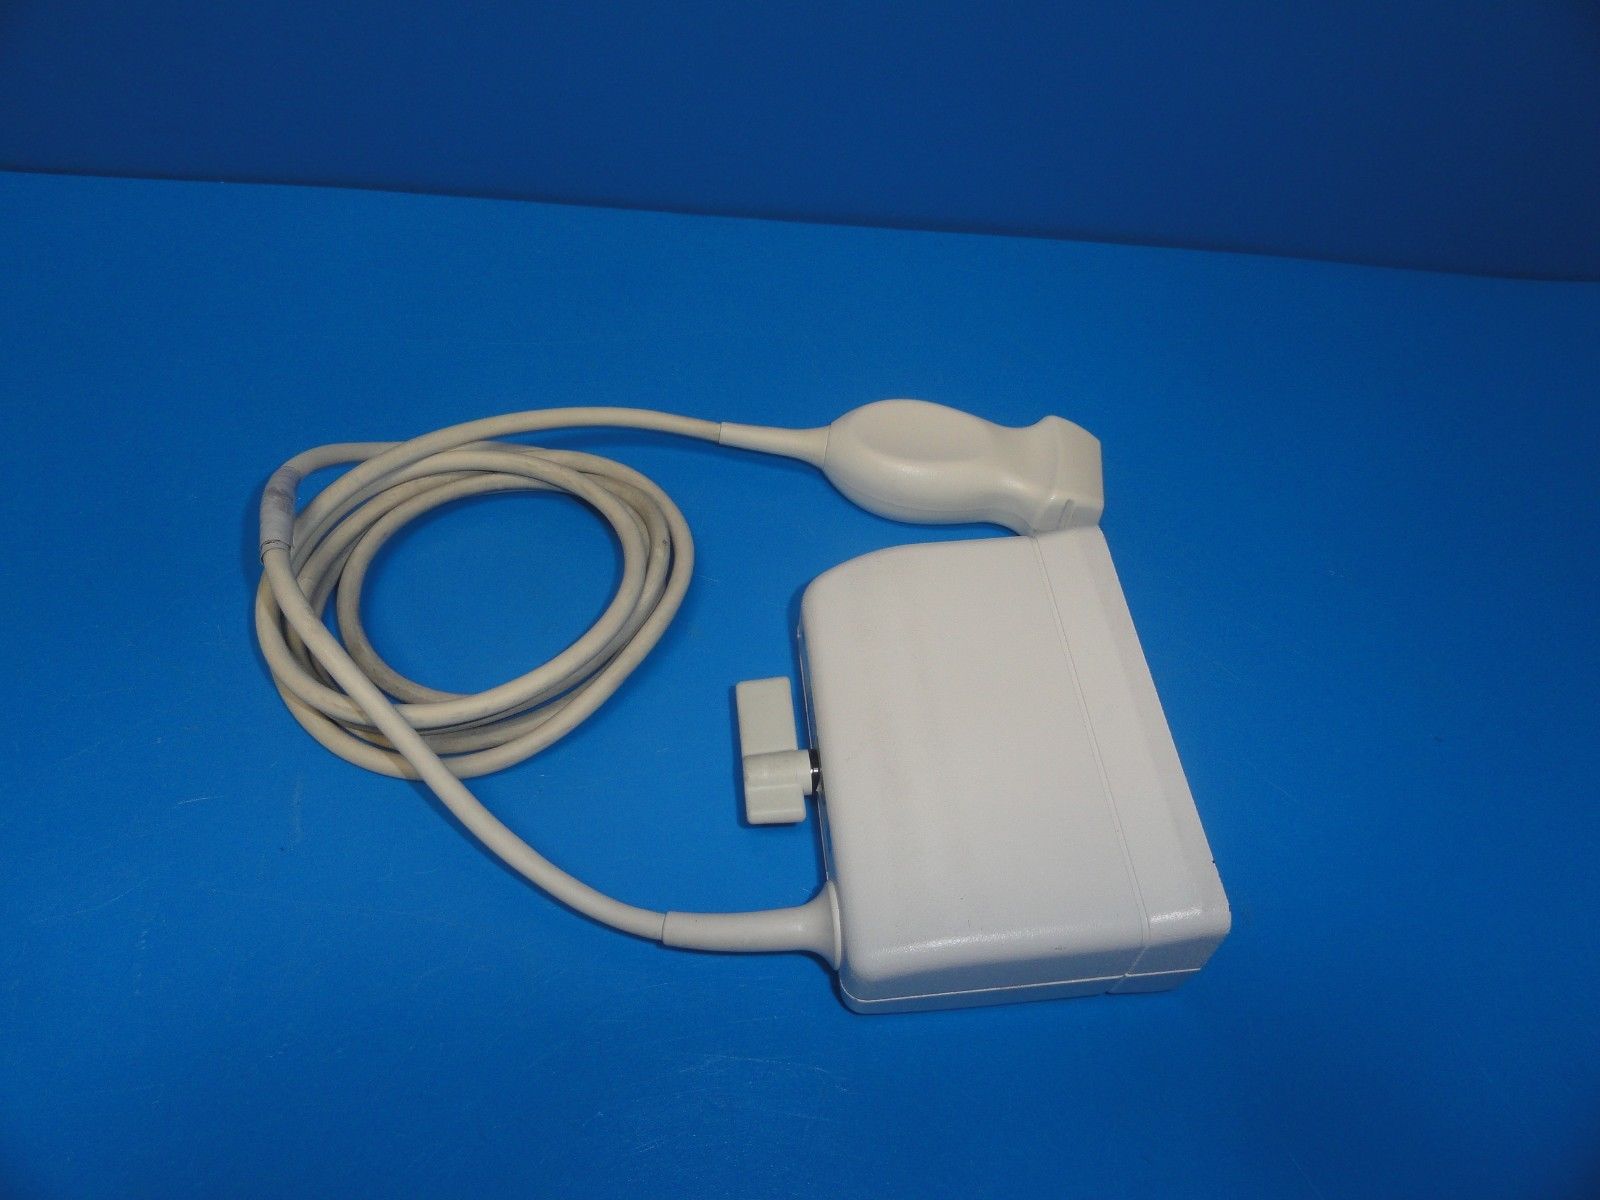 an electronic device with a cord attached to it